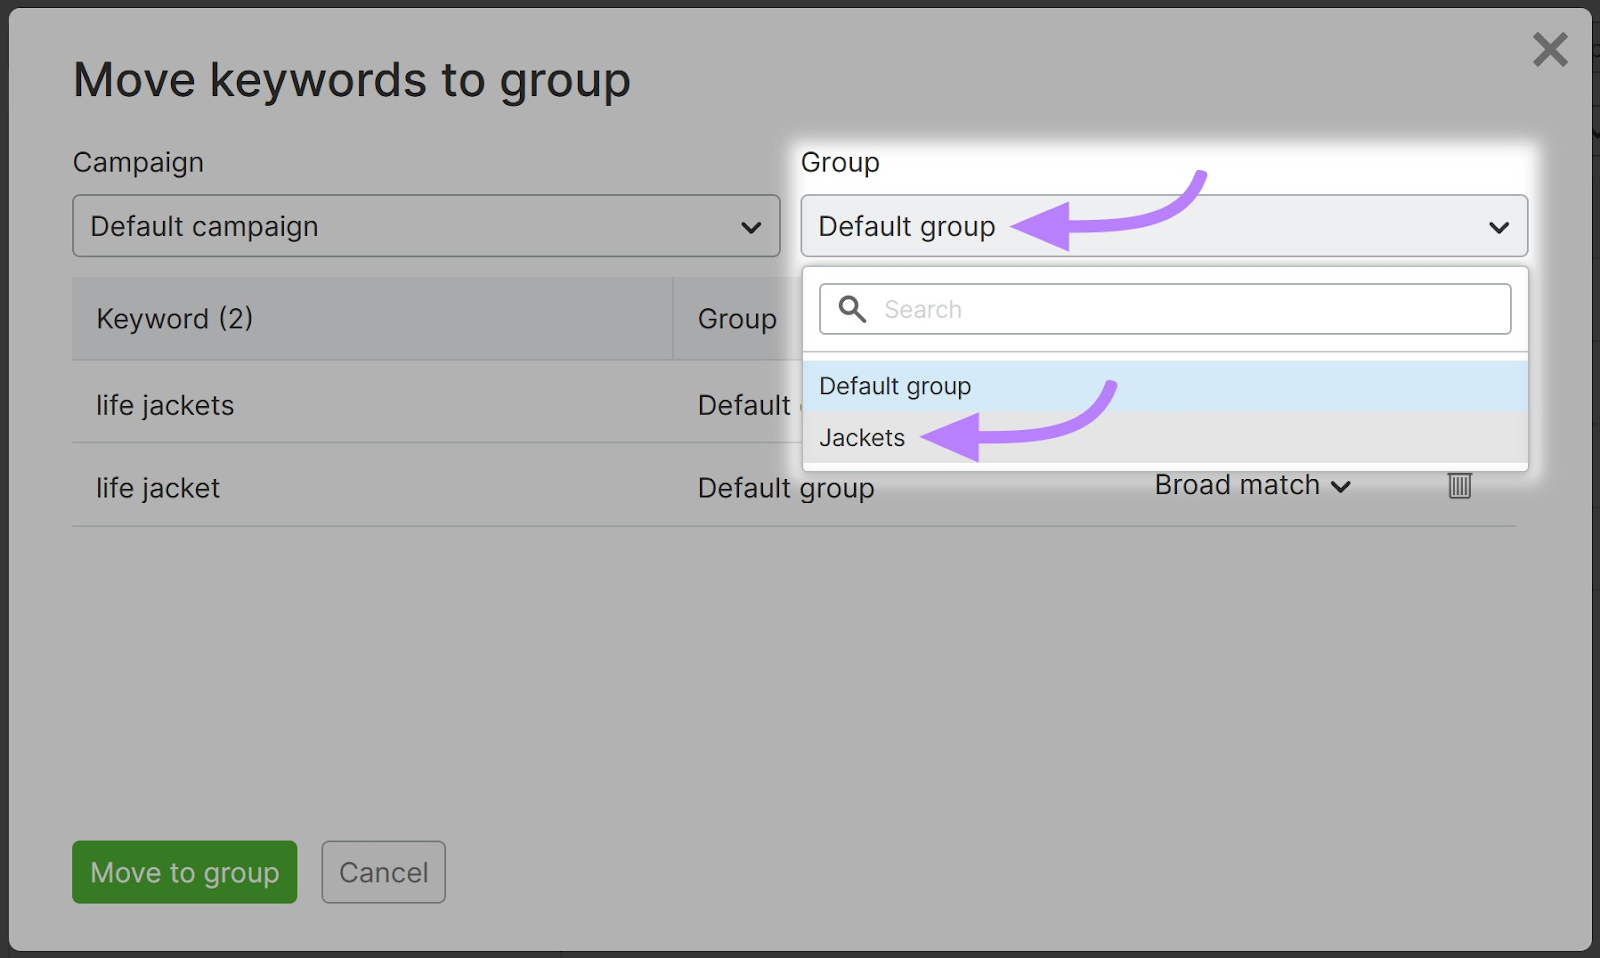 “Group” drop-down menu in the “Move keywords to group” dialogue box